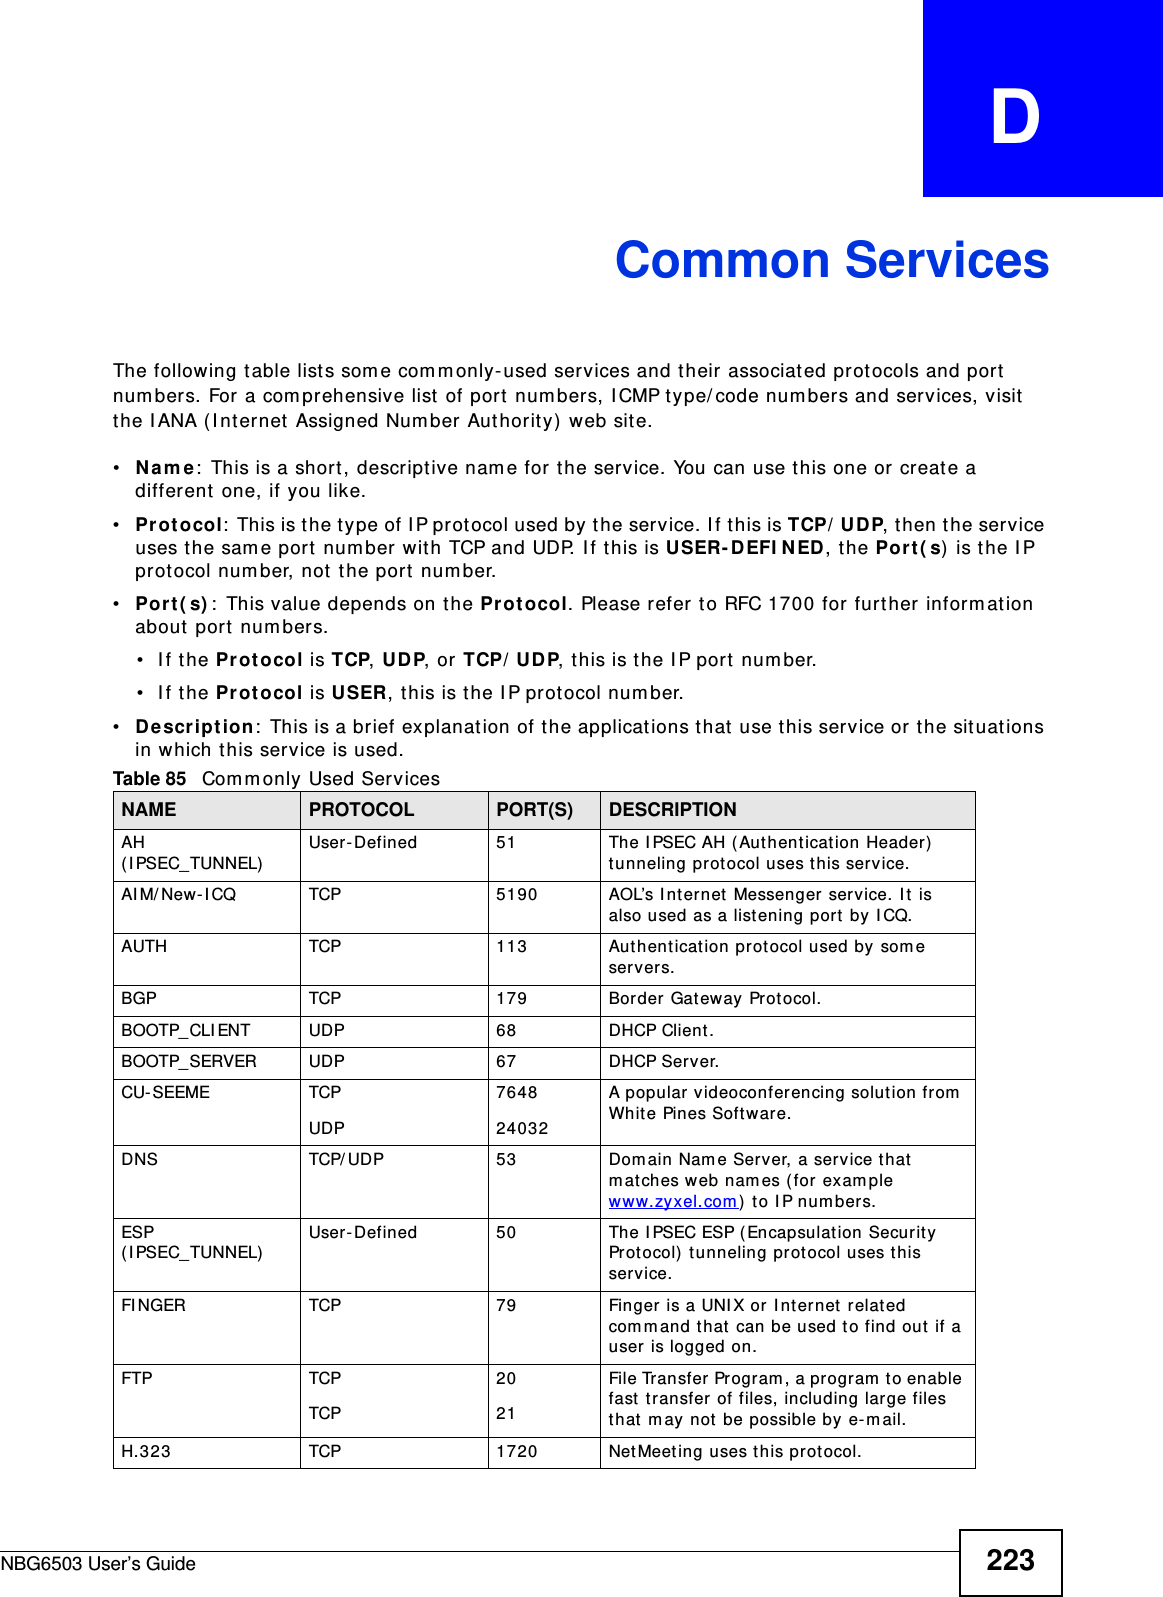 NBG6503 User’s Guide 223APPENDIX   DCommon ServicesThe following table lists some commonly-used services and their associated protocols and port numbers. For a comprehensive list of port numbers, ICMP type/code numbers and services, visit the IANA (Internet Assigned Number Authority) web site. •Name: This is a short, descriptive name for the service. You can use this one or create a different one, if you like.•Protocol: This is the type of IP protocol used by the service. If this is TCP/UDP, then the service uses the same port number with TCP and UDP. If this is USER-DEFINED, the Port(s) is the IP protocol number, not the port number.•Port(s): This value depends on the Protocol. Please refer to RFC 1700 for further information about port numbers.•If the Protocol is TCP, UDP, or TCP/UDP, this is the IP port number.•If the Protocol is USER, this is the IP protocol number.•Description: This is a brief explanation of the applications that use this service or the situations in which this service is used.Table 85   Commonly Used ServicesNAME PROTOCOL PORT(S) DESCRIPTIONAH (IPSEC_TUNNEL) User-Defined 51 The IPSEC AH (Authentication Header) tunneling protocol uses this service.AIM/New-ICQ TCP 5190 AOL’s Internet Messenger service. It is also used as a listening port by ICQ.AUTH TCP 113 Authentication protocol used by some servers.BGP TCP 179 Border Gateway Protocol.BOOTP_CLIENT UDP 68 DHCP Client.BOOTP_SERVER UDP 67 DHCP Server.CU-SEEME TCPUDP764824032A popular videoconferencing solution from White Pines Software.DNS TCP/UDP 53 Domain Name Server, a service that matches web names (for example www.zyxel.com) to IP numbers.ESP (IPSEC_TUNNEL) User-Defined 50 The IPSEC ESP (Encapsulation Security Protocol) tunneling protocol uses this service.FINGER TCP 79 Finger is a UNIX or Internet related command that can be used to find out if a user is logged on.FTP TCPTCP2021File Transfer Program, a program to enable fast transfer of files, including large files that may not be possible by e-mail.H.323 TCP 1720 NetMeeting uses this protocol.